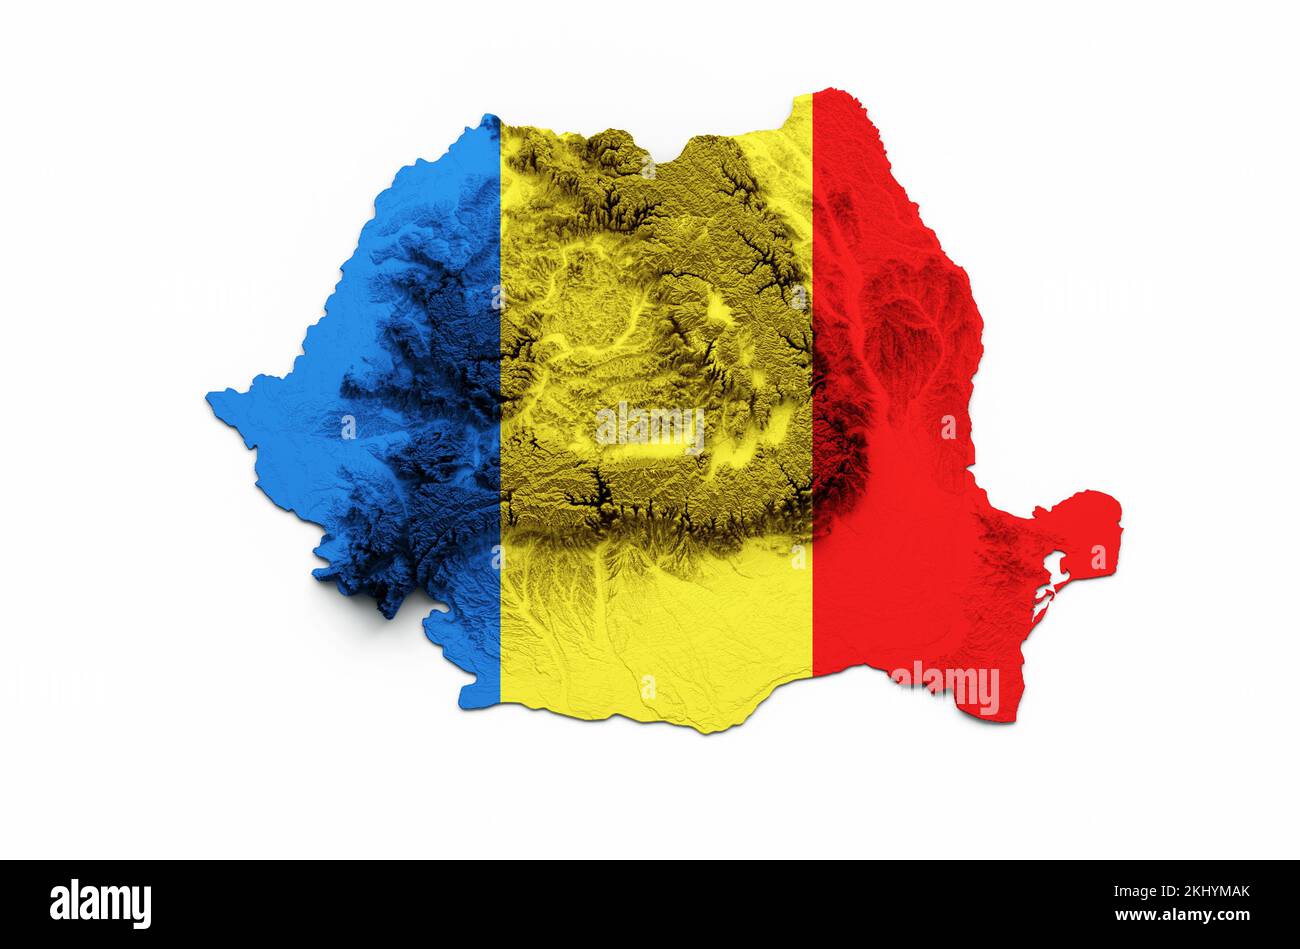 The Romania map with the flag isolated on a white background Stock Photo